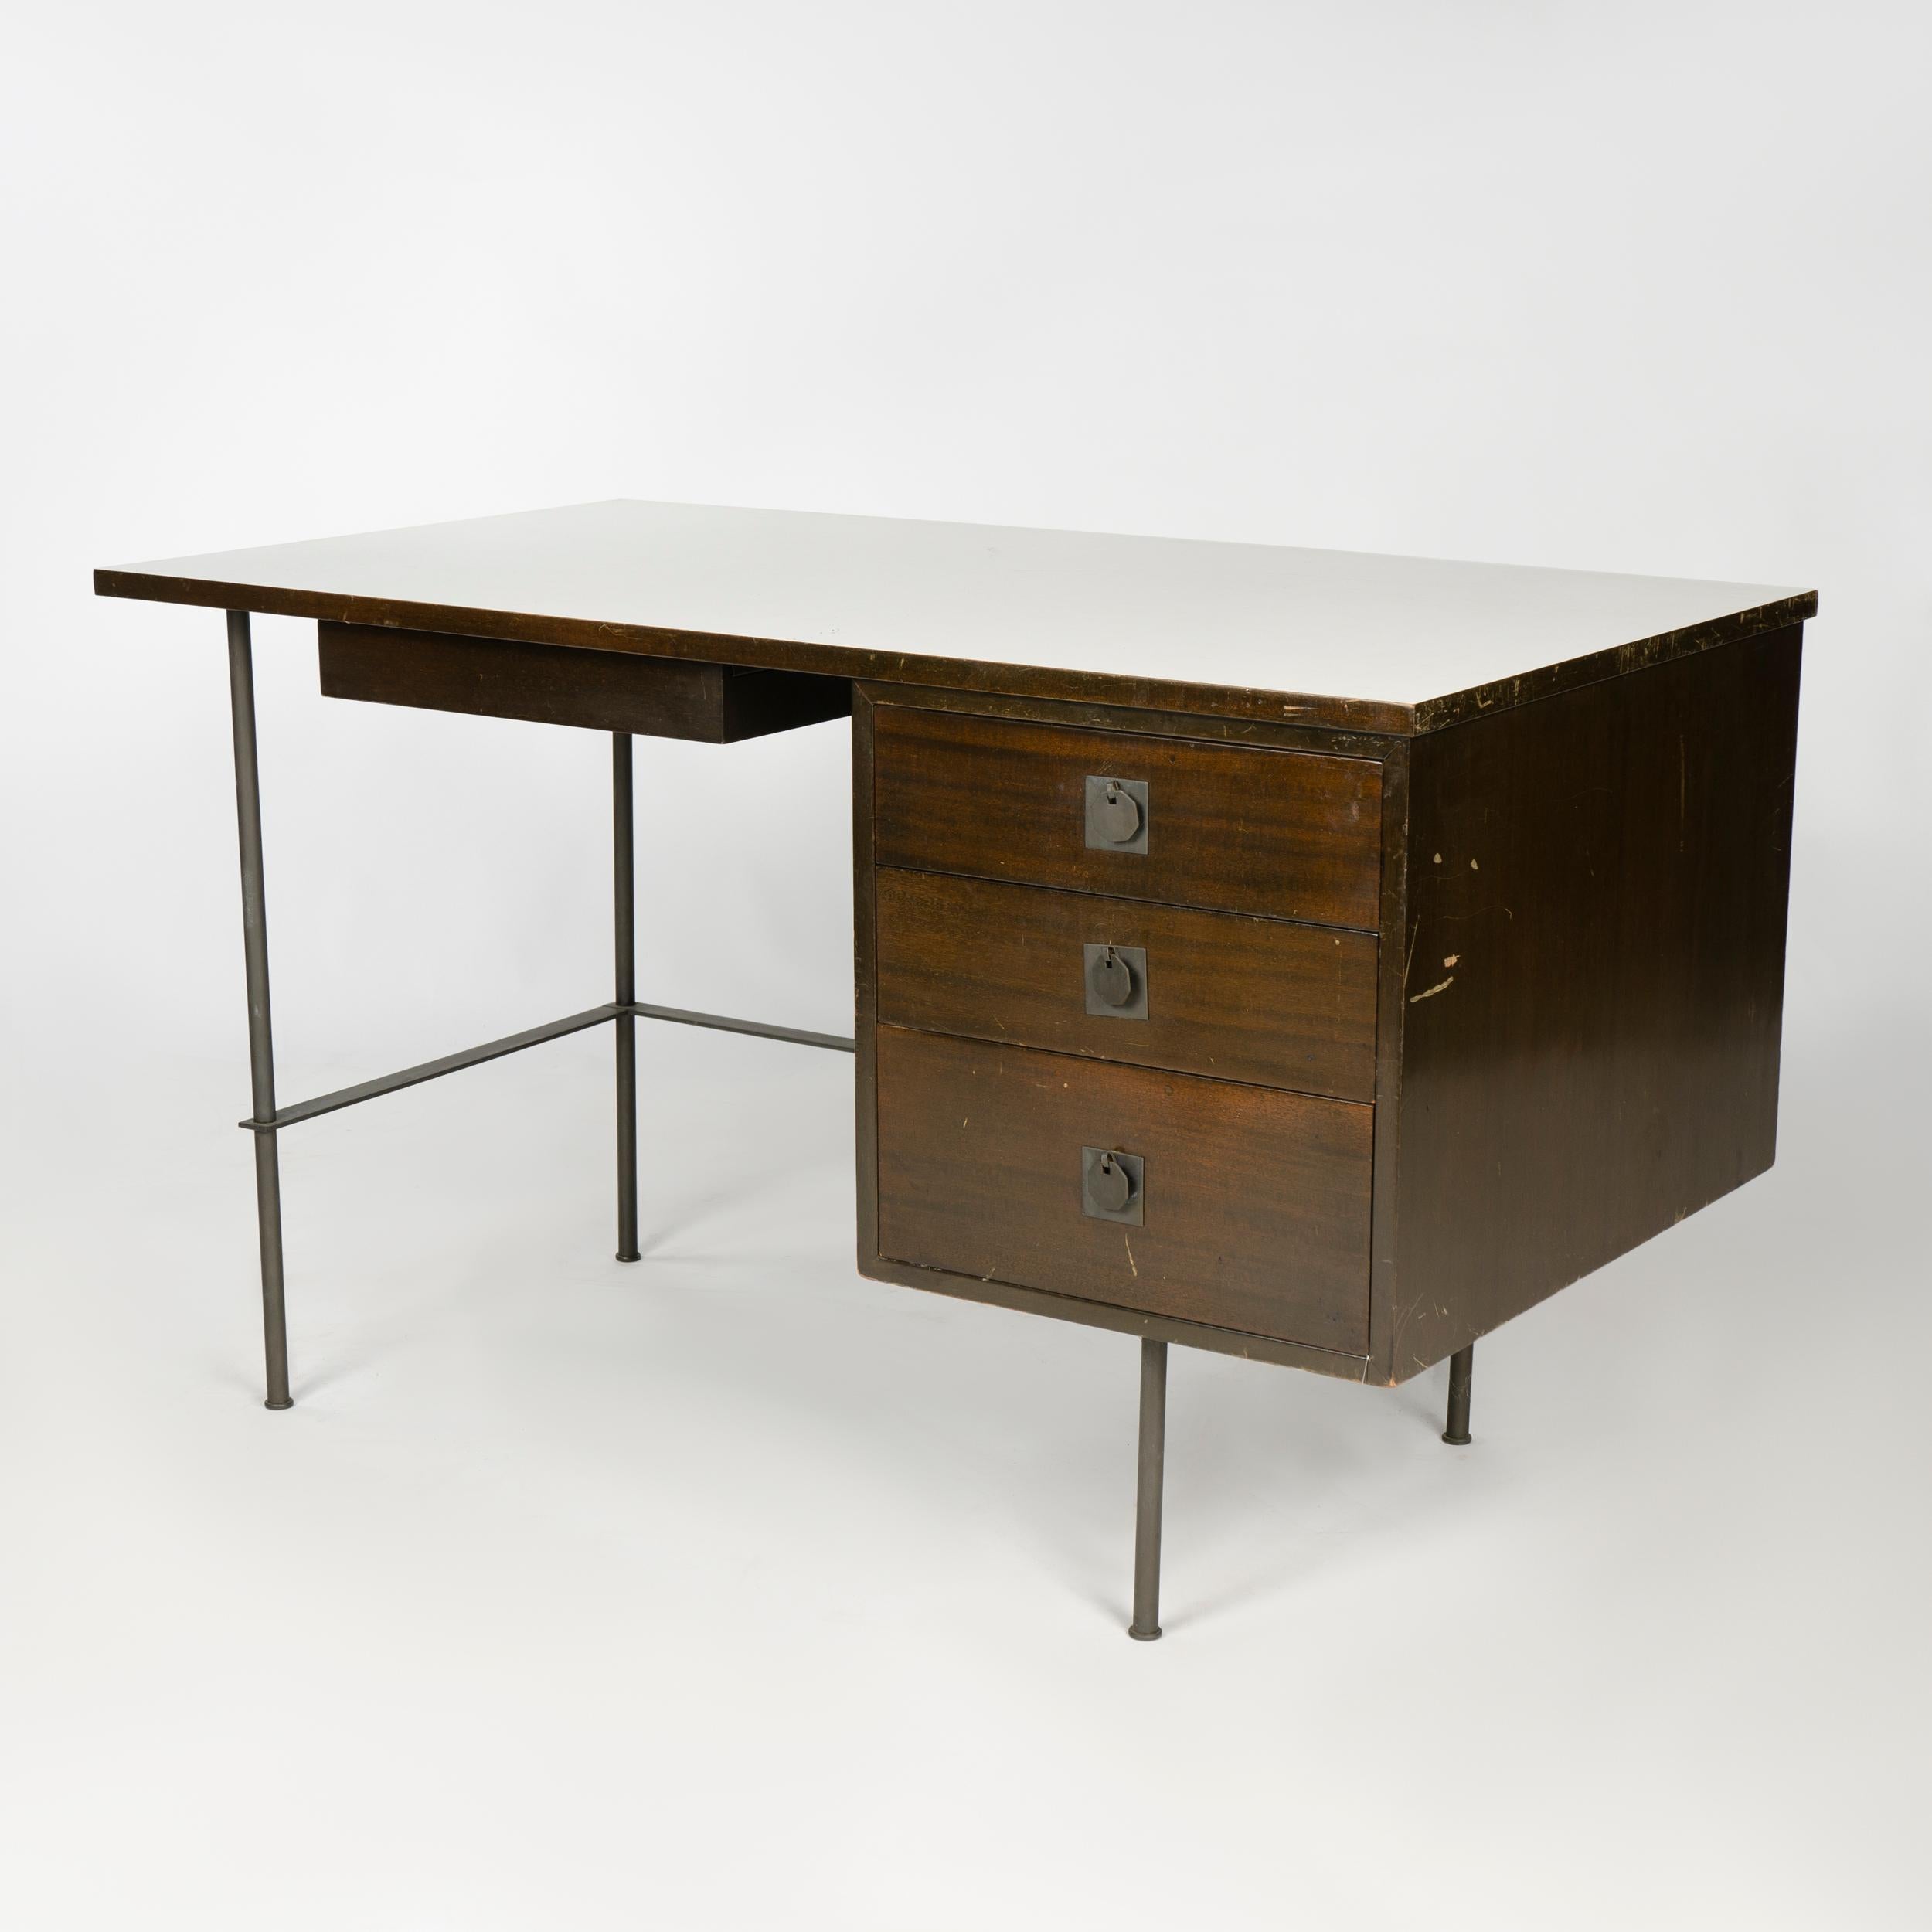 A four-drawer mahogany metaphor desk with solid brass legs and white laminate top. Priced as-is.